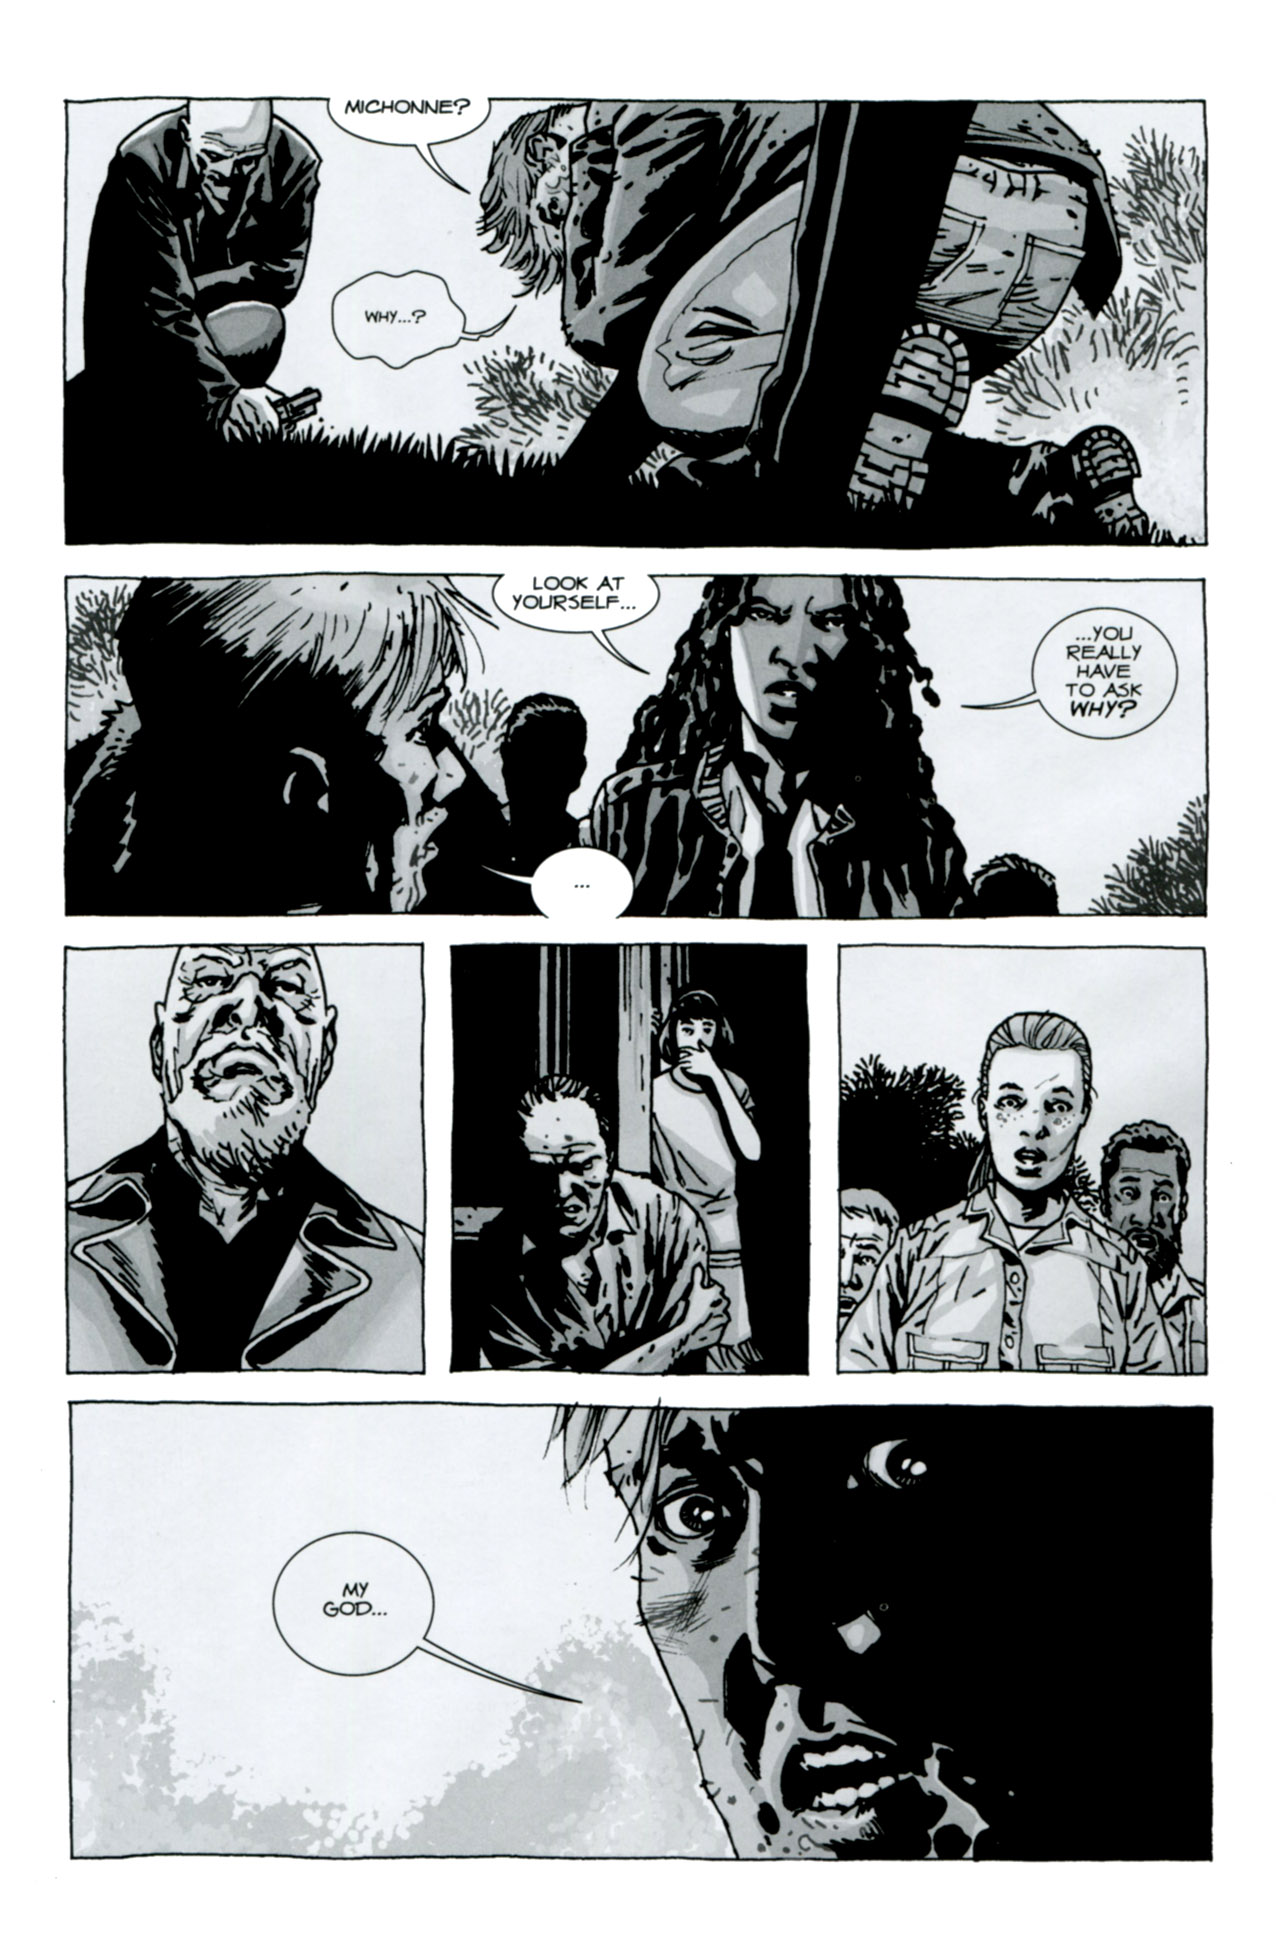 cartoon - Michonne? Why...? 1 Look At Yourself... ...You Really Have To Ask Why?